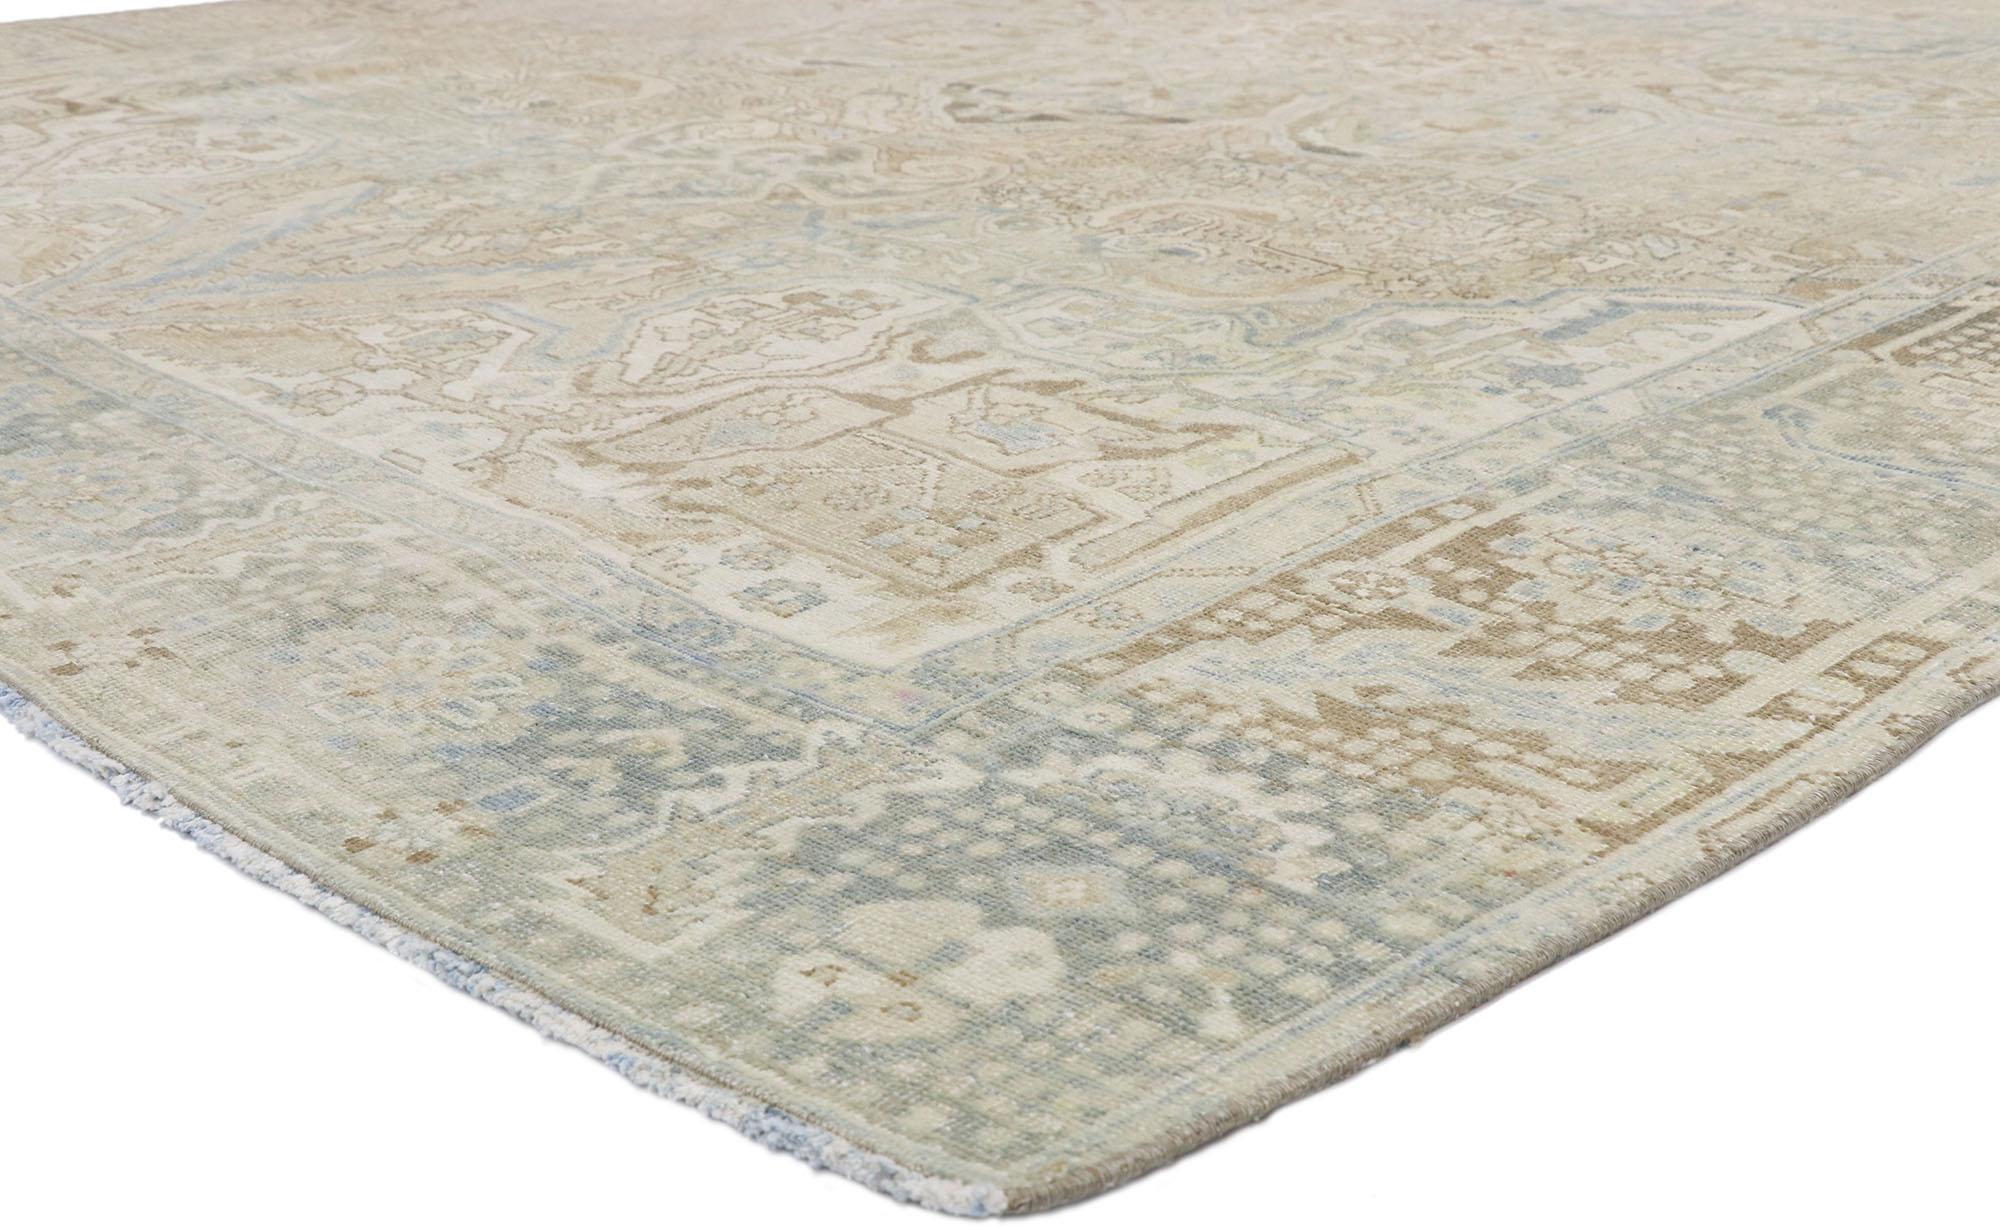 52756 Distressed Vintage Persian Heriz Design Rug with Rustic English Manor Style 08'06 x 12'00. With a timeless floral pattern and lovingly timeworn appearance, this hand knotted wool distressed vintage Persian Heriz design rug beautifully embodies